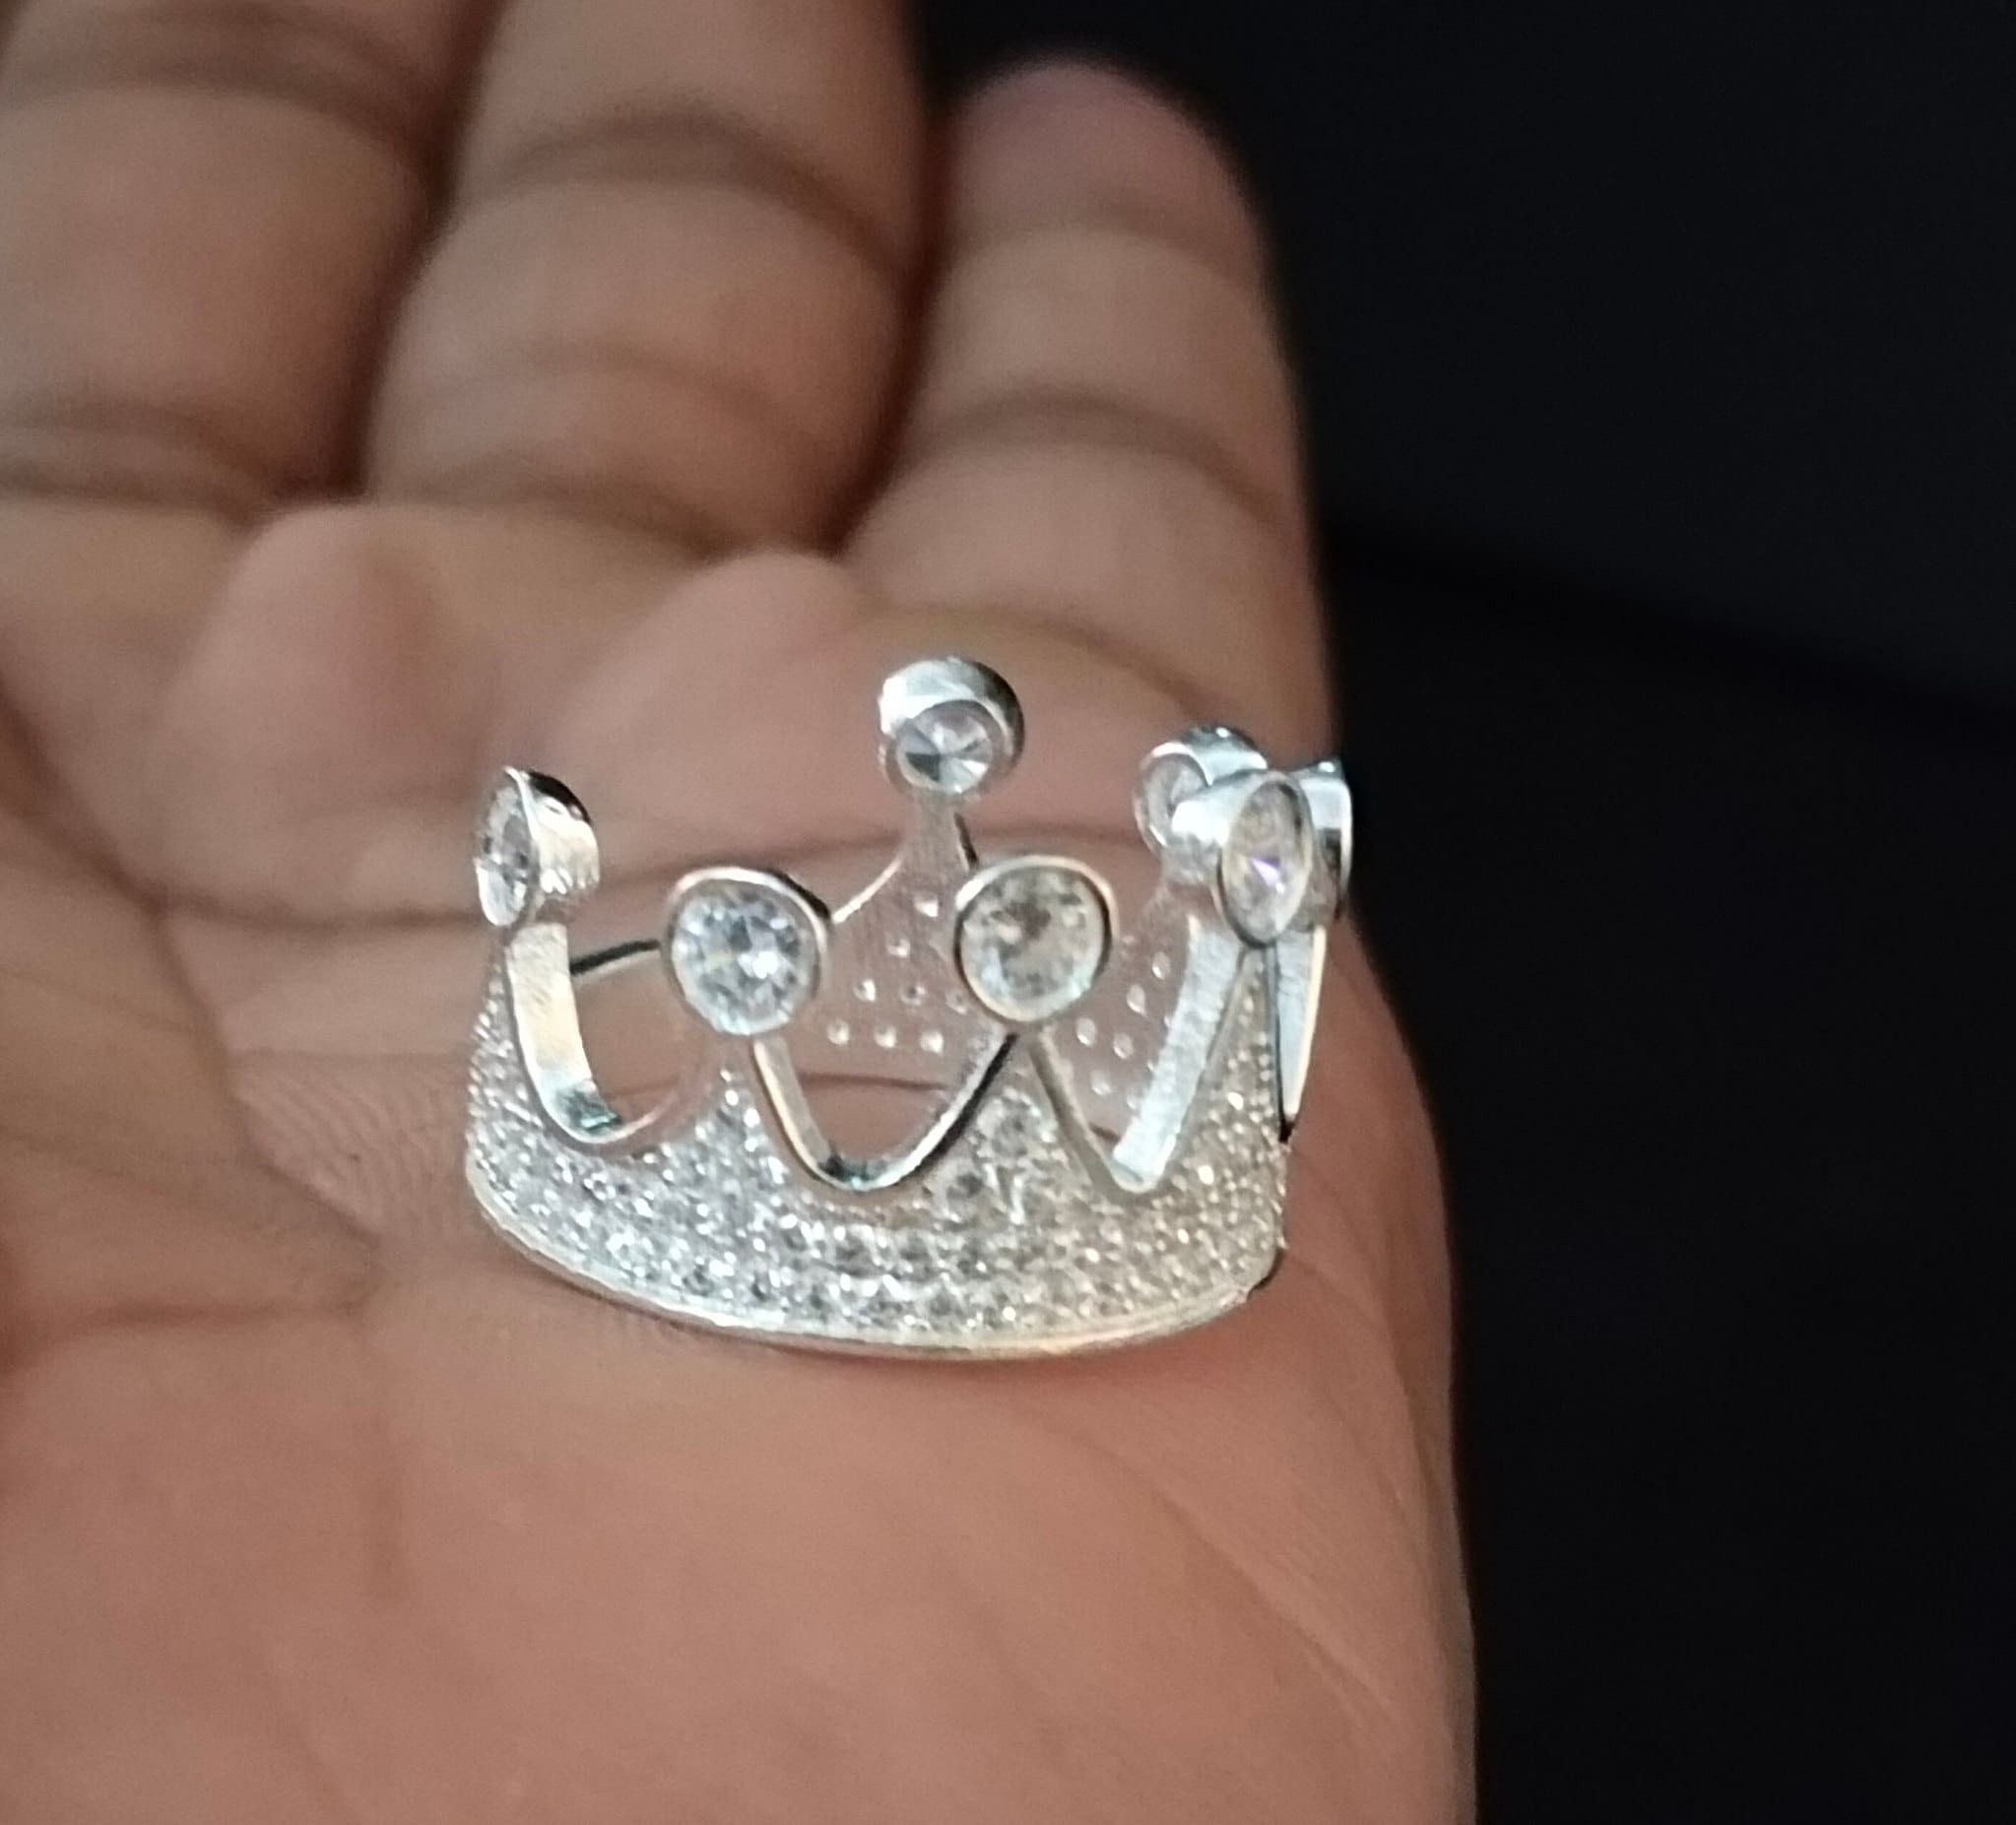 King & Queen,crow ring set, gold crown ring,gold crown ring set,925k silver  decorated with high quality zircon – UNIQUENEWLINE